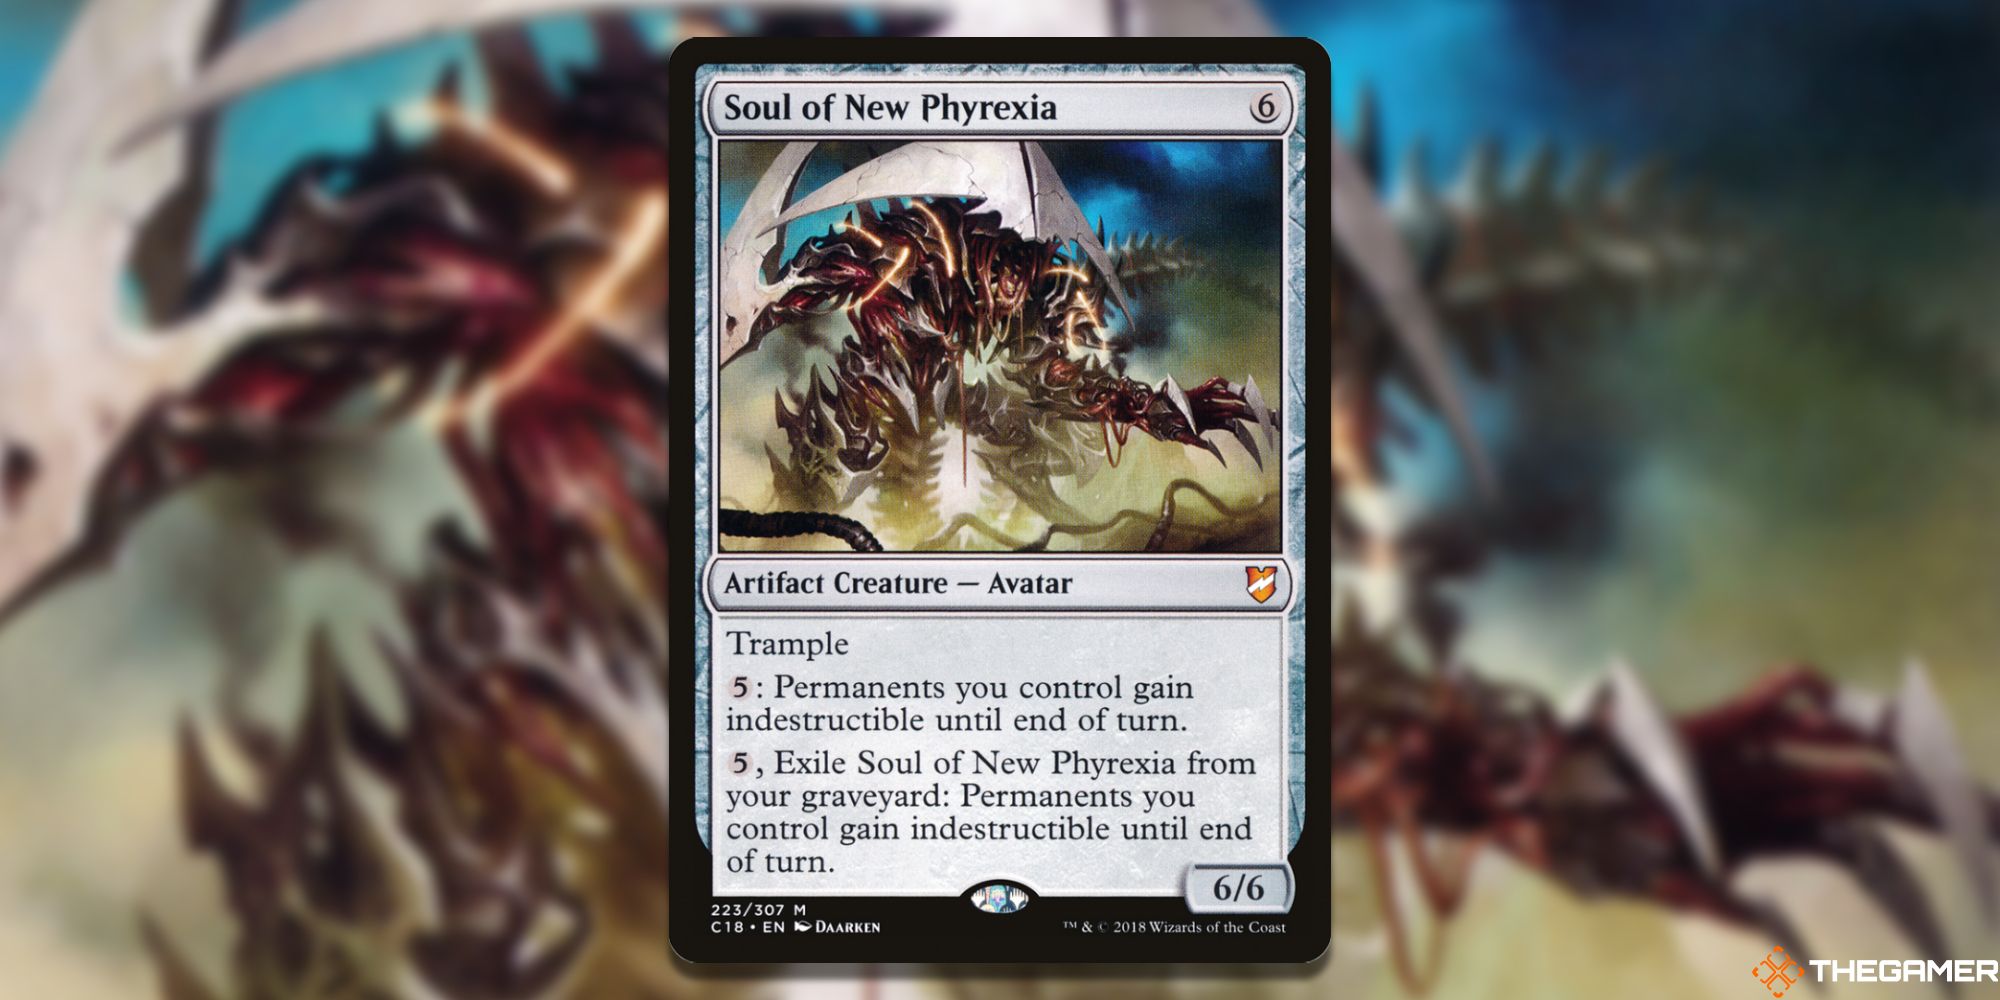 Image of the Soul of New Phyrexia card in Magic: The Gathering, with art by Daarken